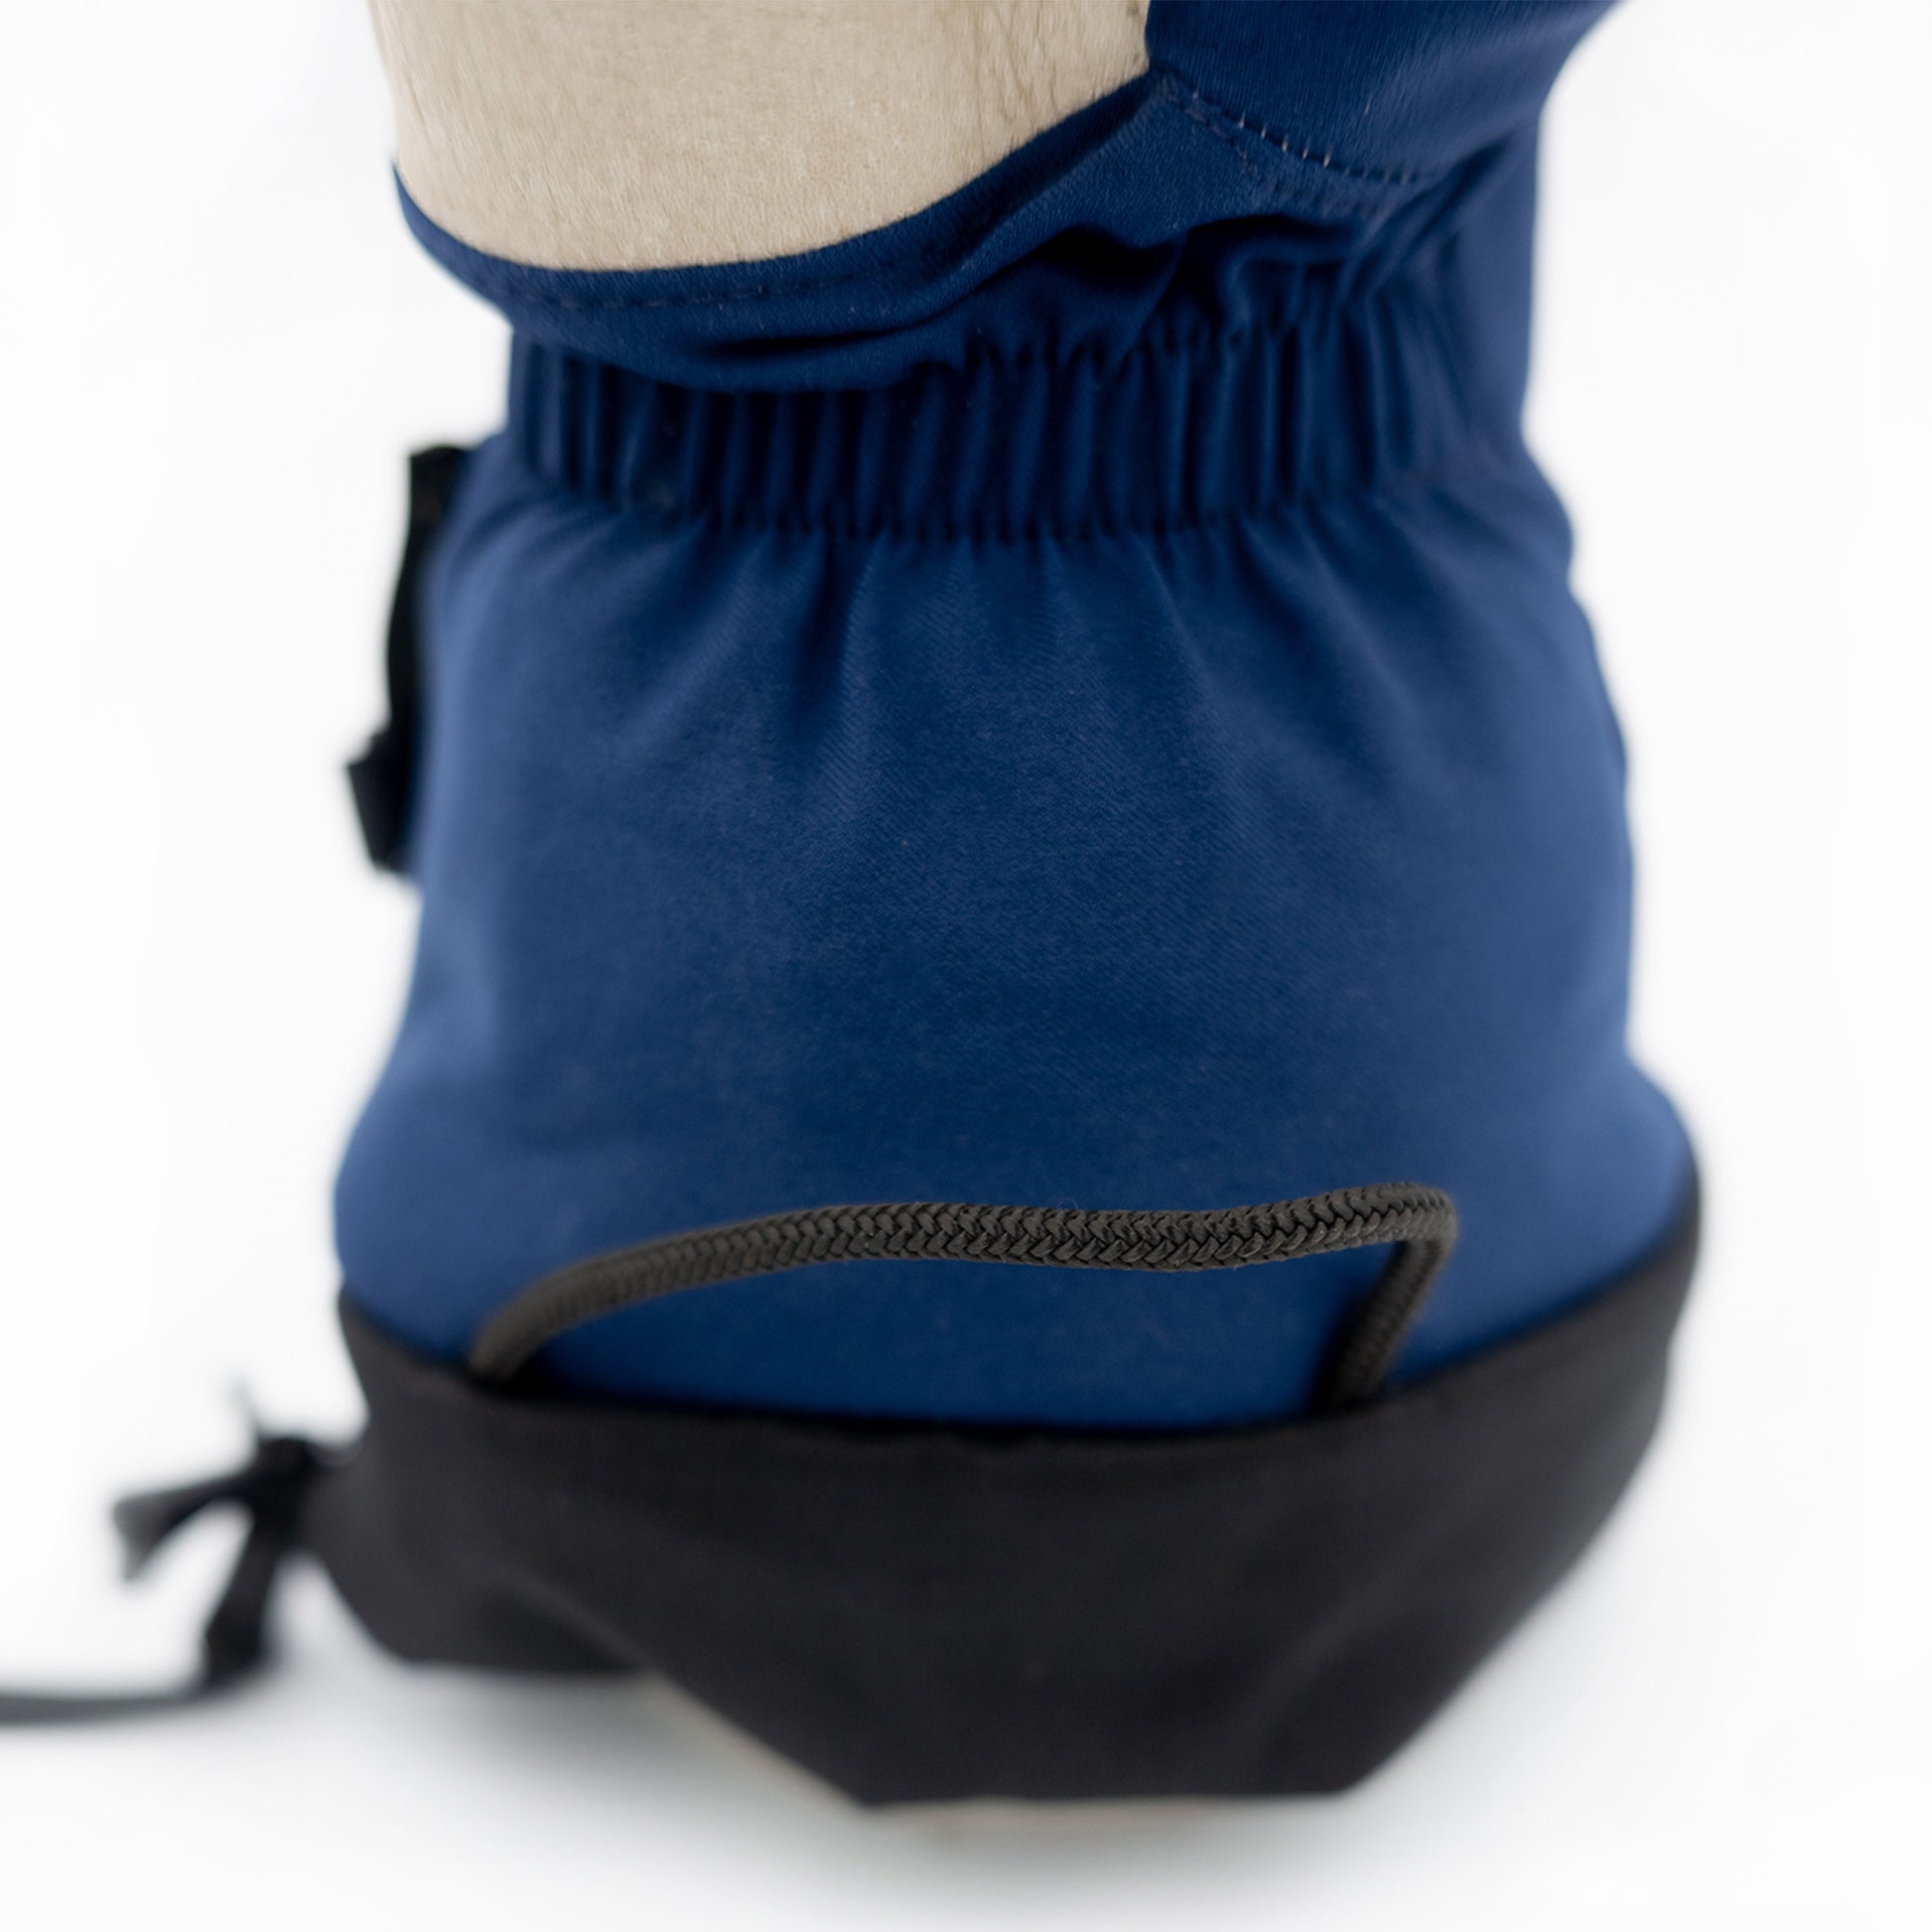 The back of a dog wearing a blue jacket designed with Mainers Mitts for enhanced durability.